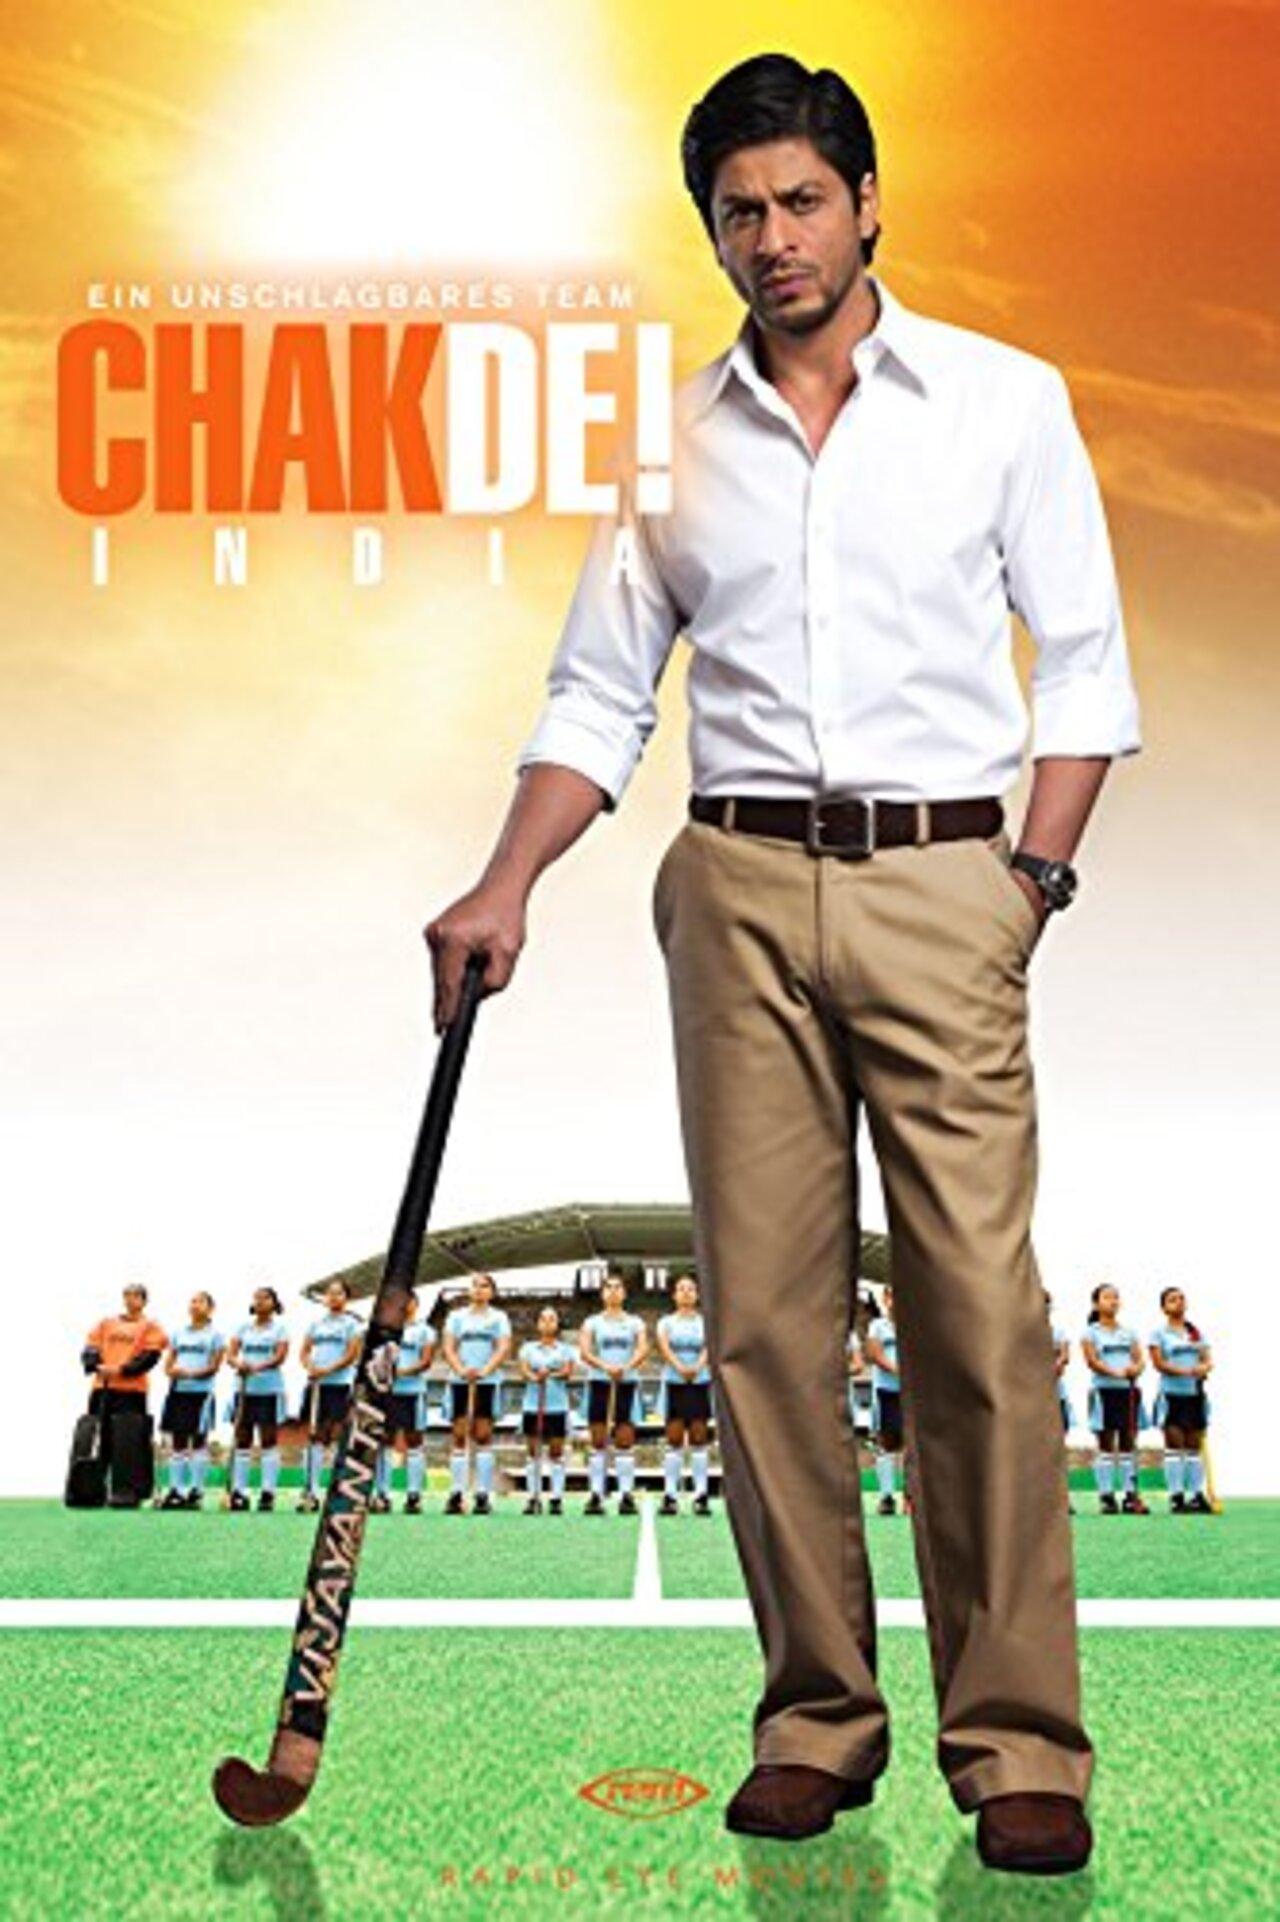 ‘Maula Mere Le Le Meri Jaan’ is a soulful and emotional song from the 2007 Bollywood film ‘Chak De! India’